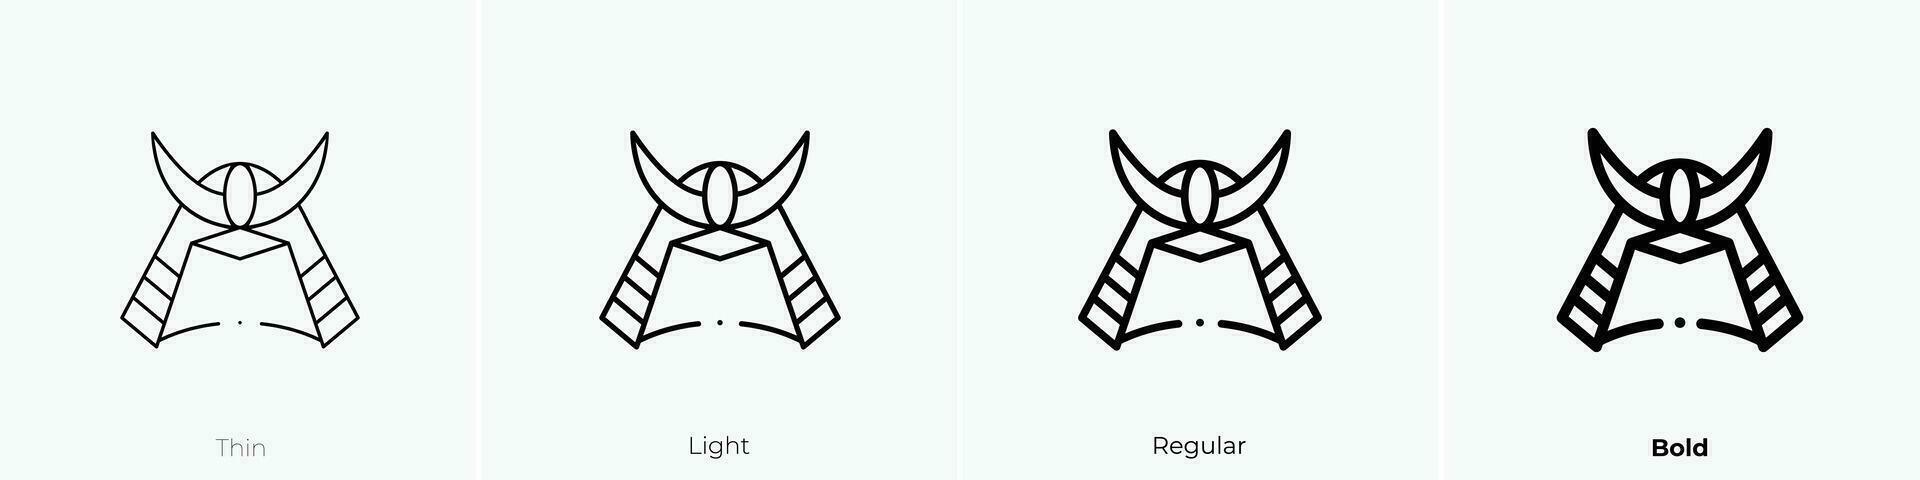 samurai icon. Thin, Light, Regular And Bold style design isolated on white background vector